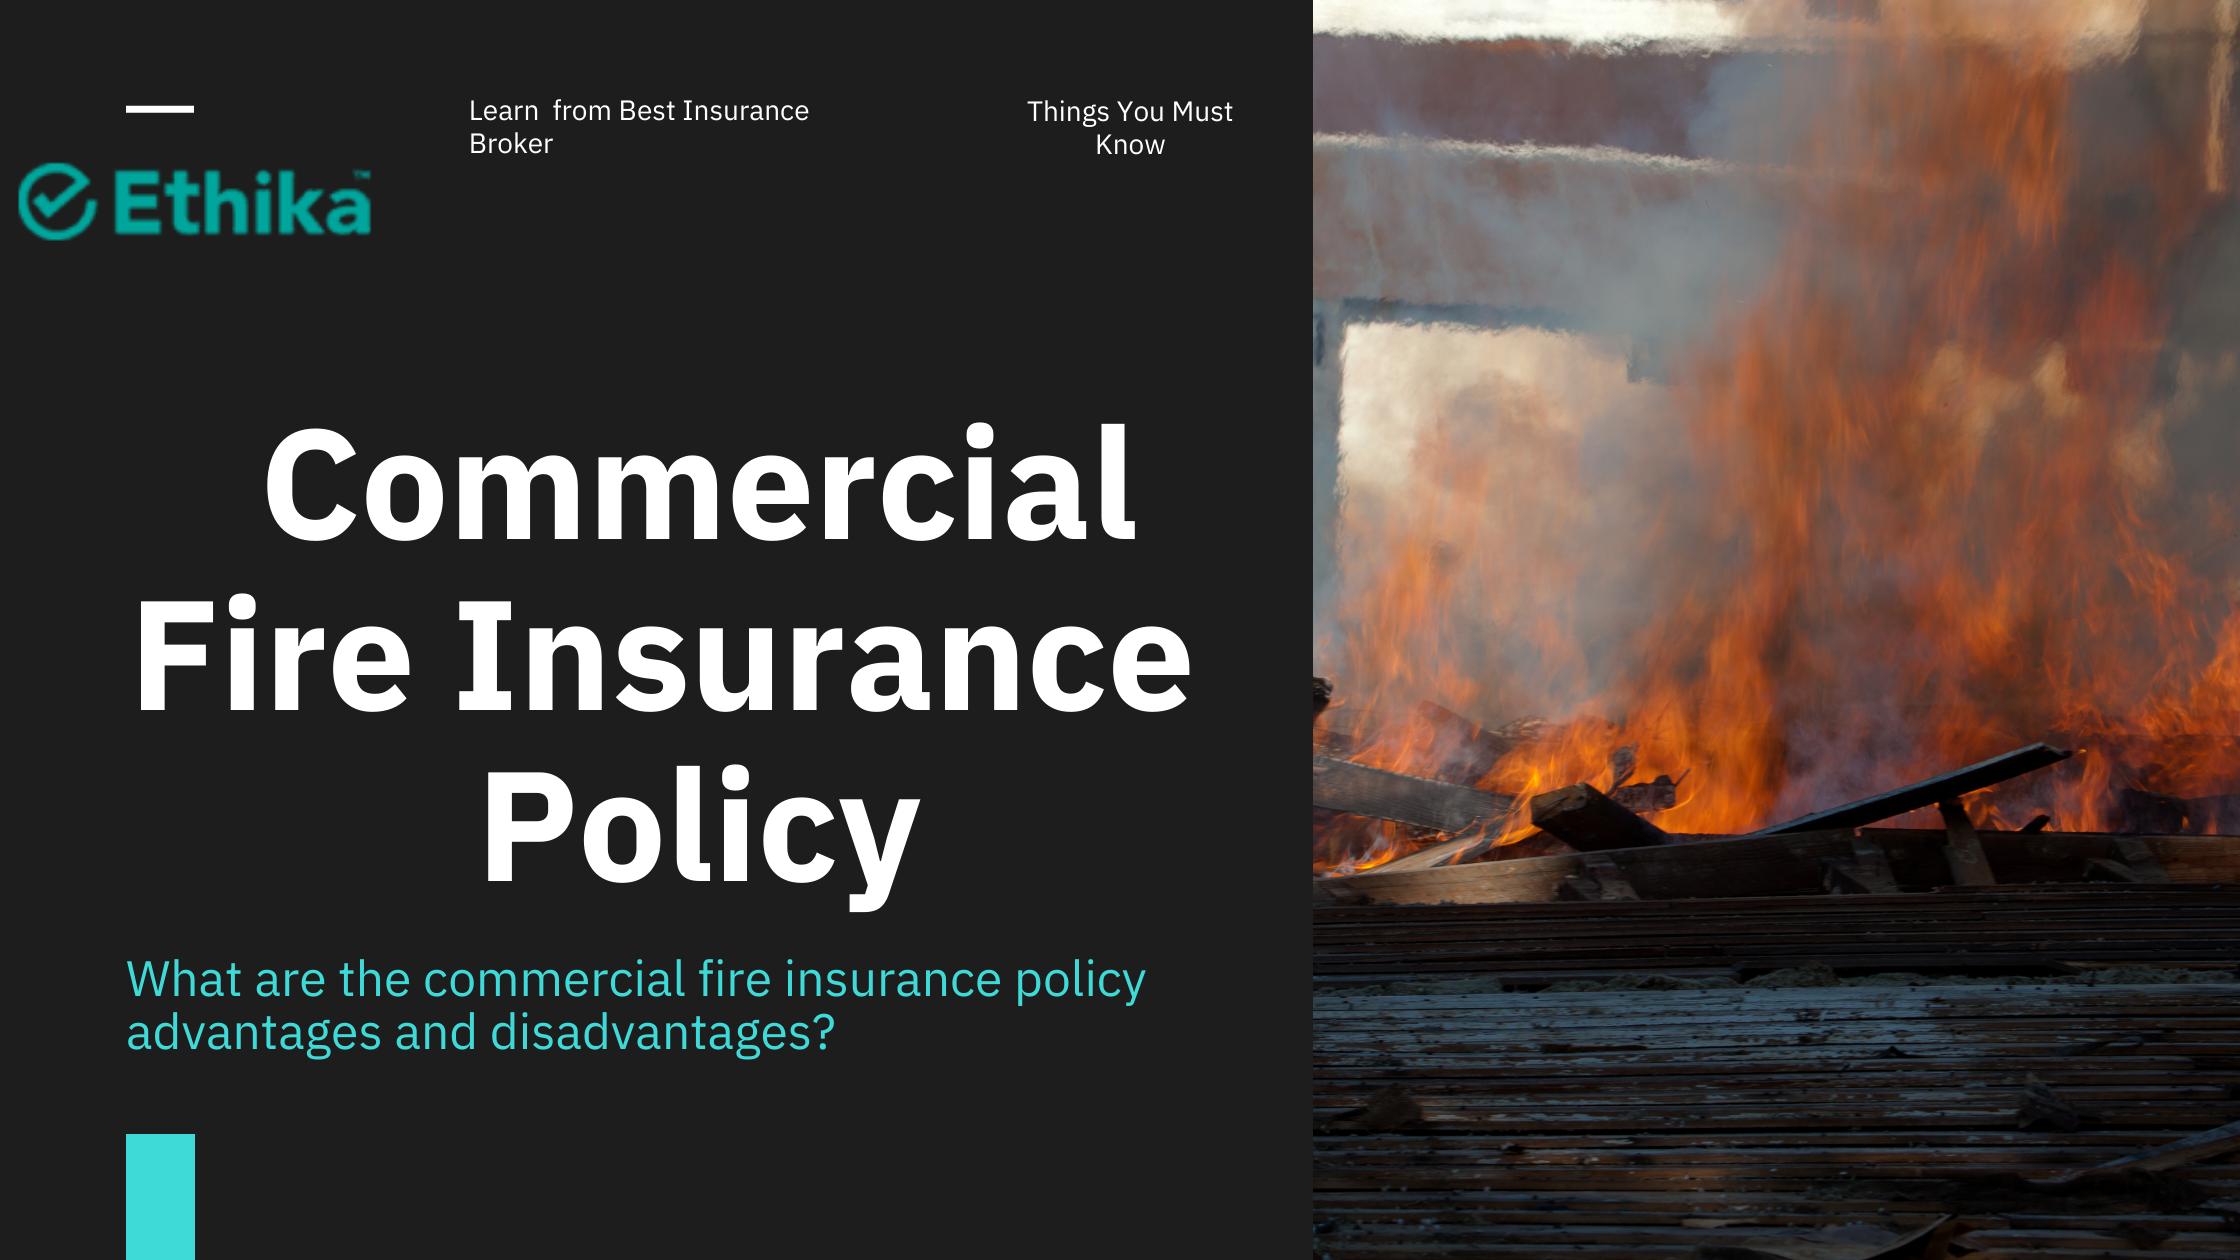 fire insurance policy advantages and disadvantages